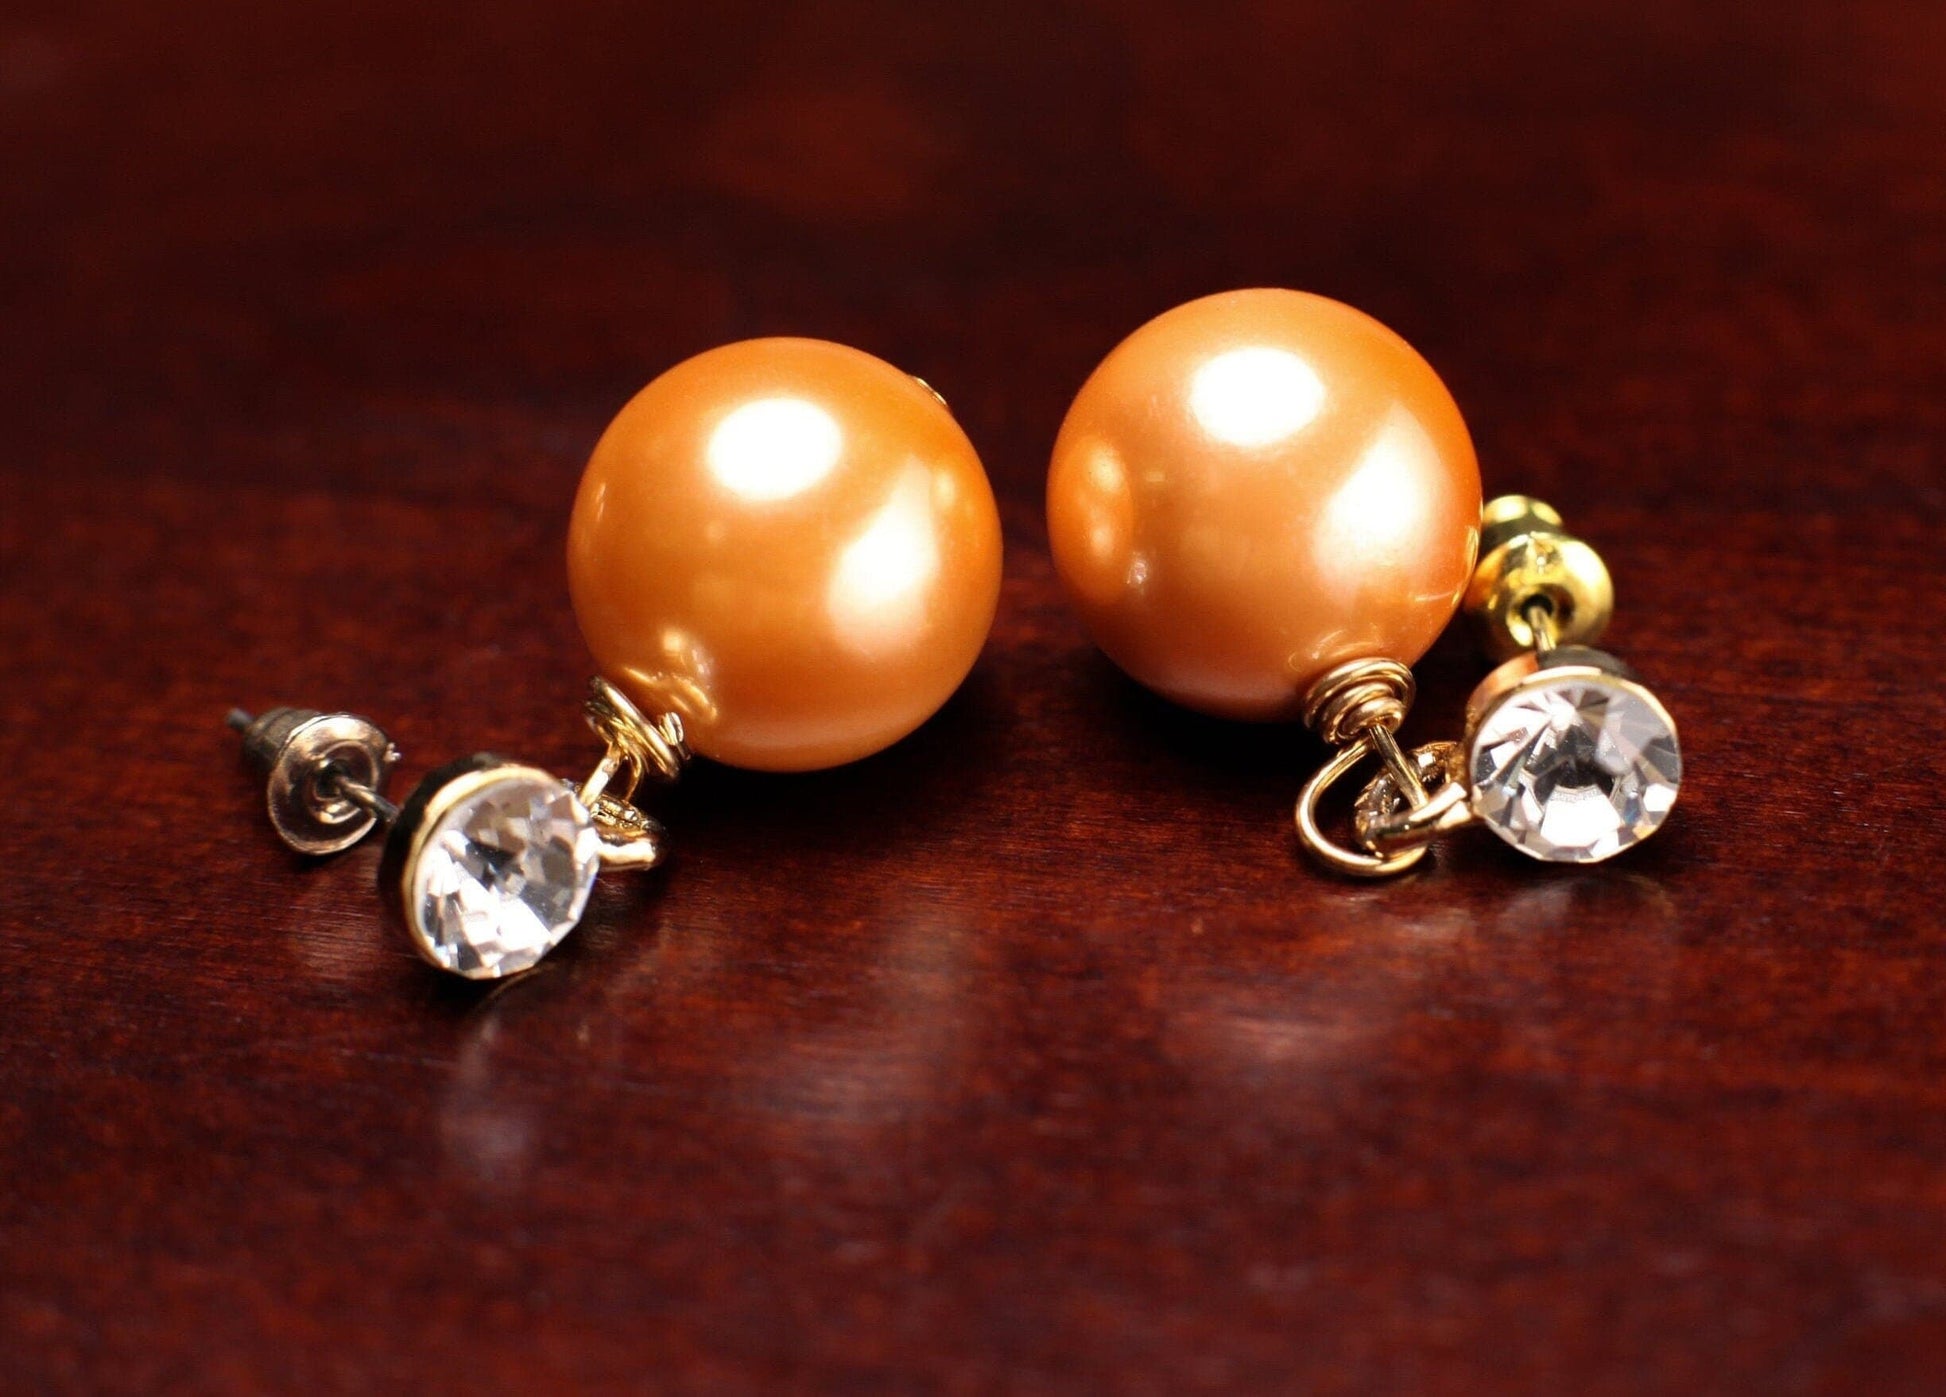 Honey Yellow South Sea Shell Pearl 12mm ,14mm Largre High Luster Earrings, Leverback or Crystal post , Bridal, Gift for Her